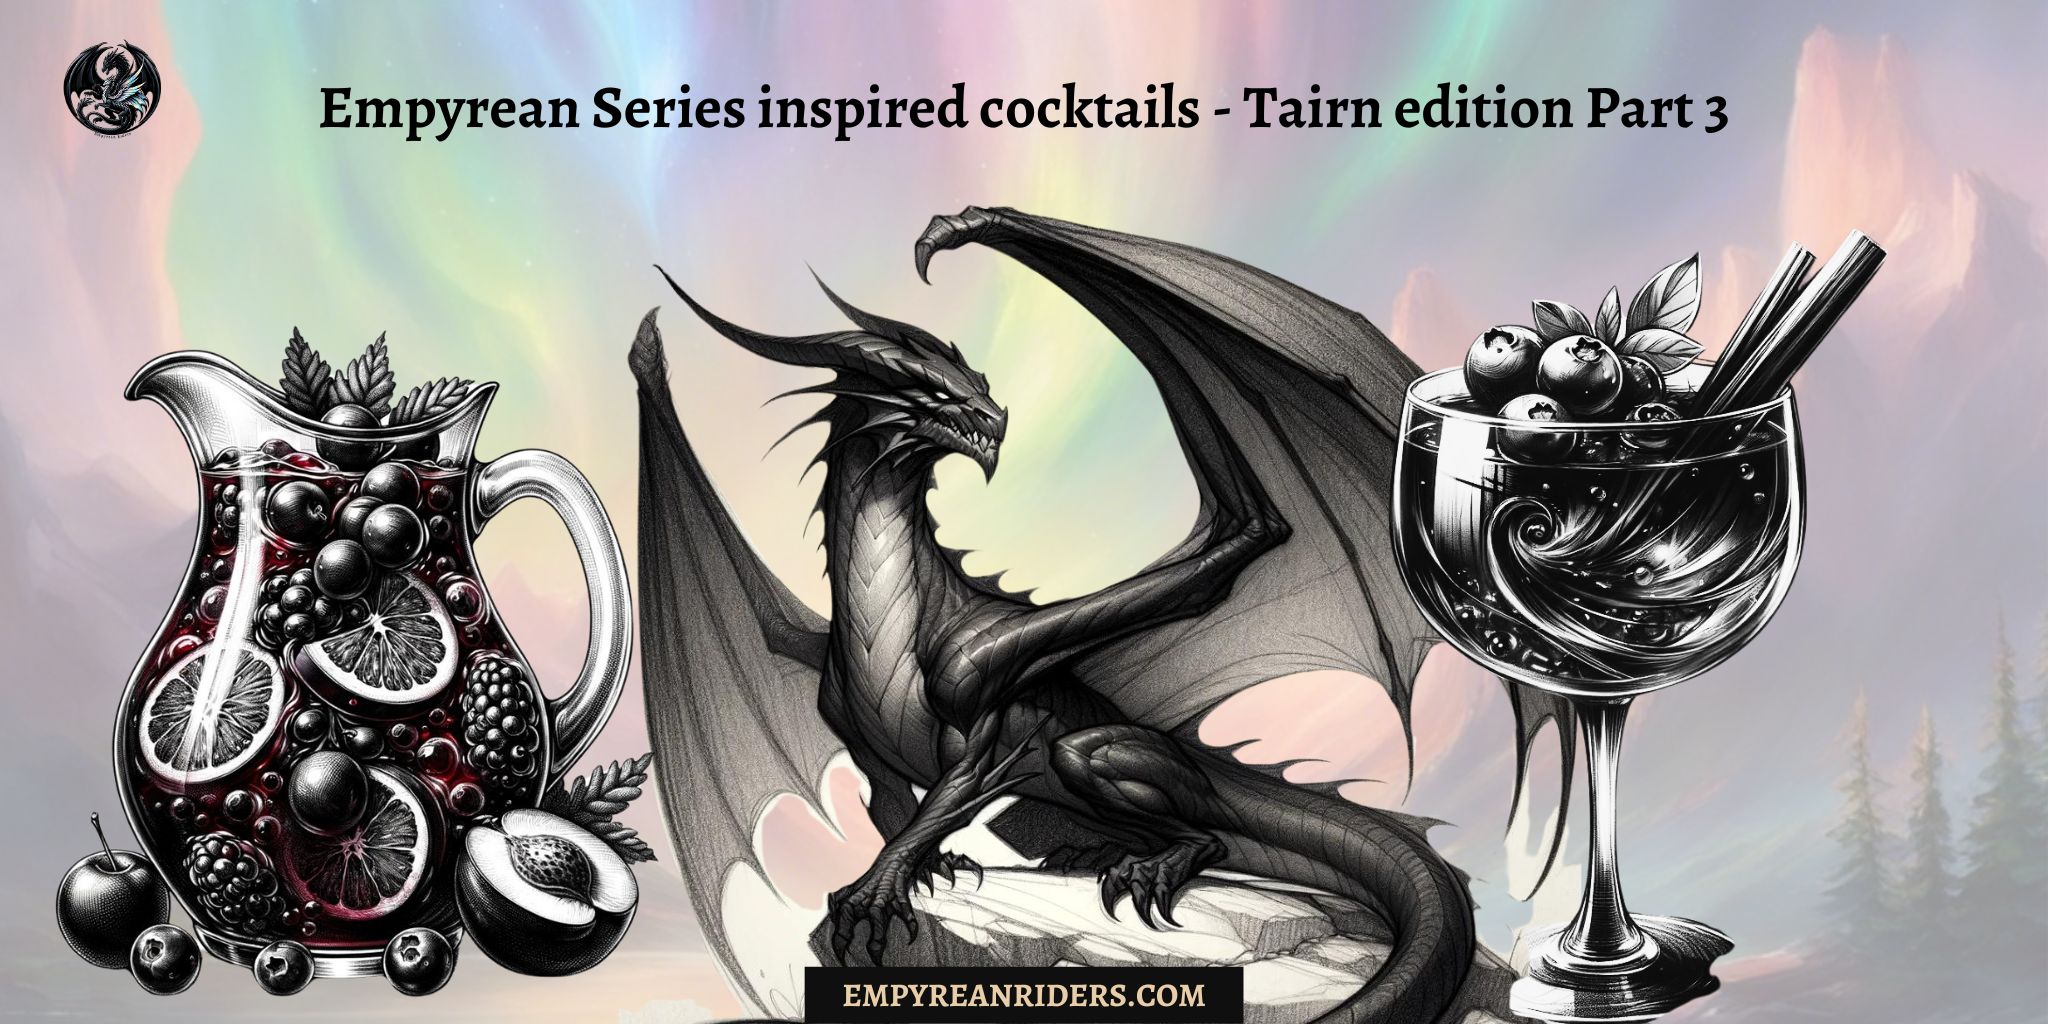 Empyrean Series inspired cocktails – Tairn edition Part 3